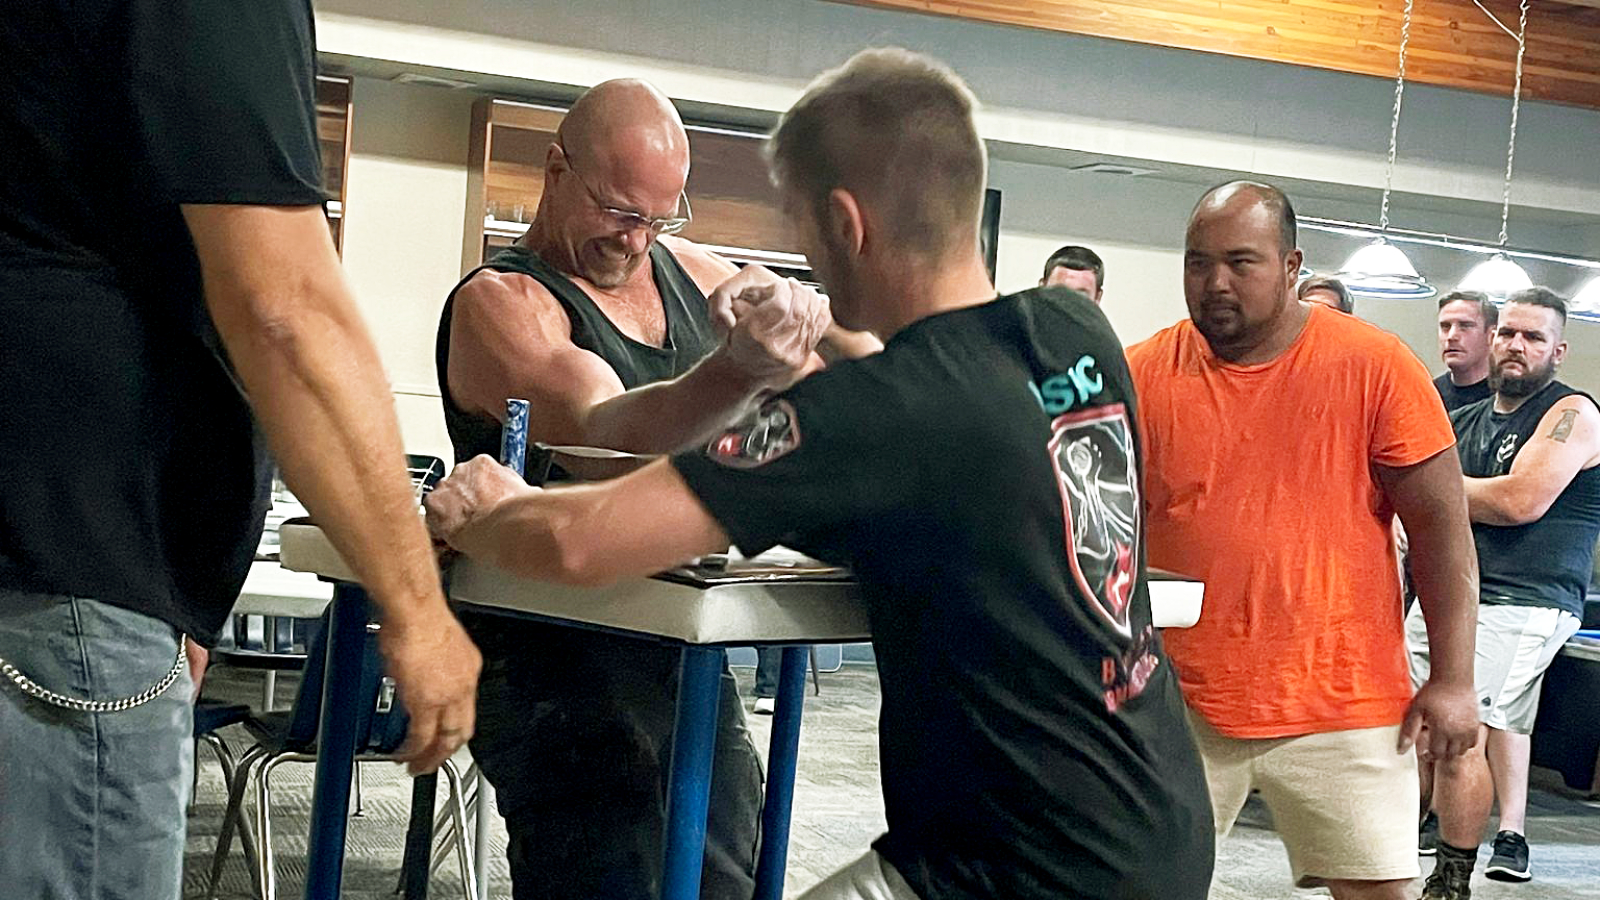 One of Alberta's top arm wrestlers is a 9-year-old who can